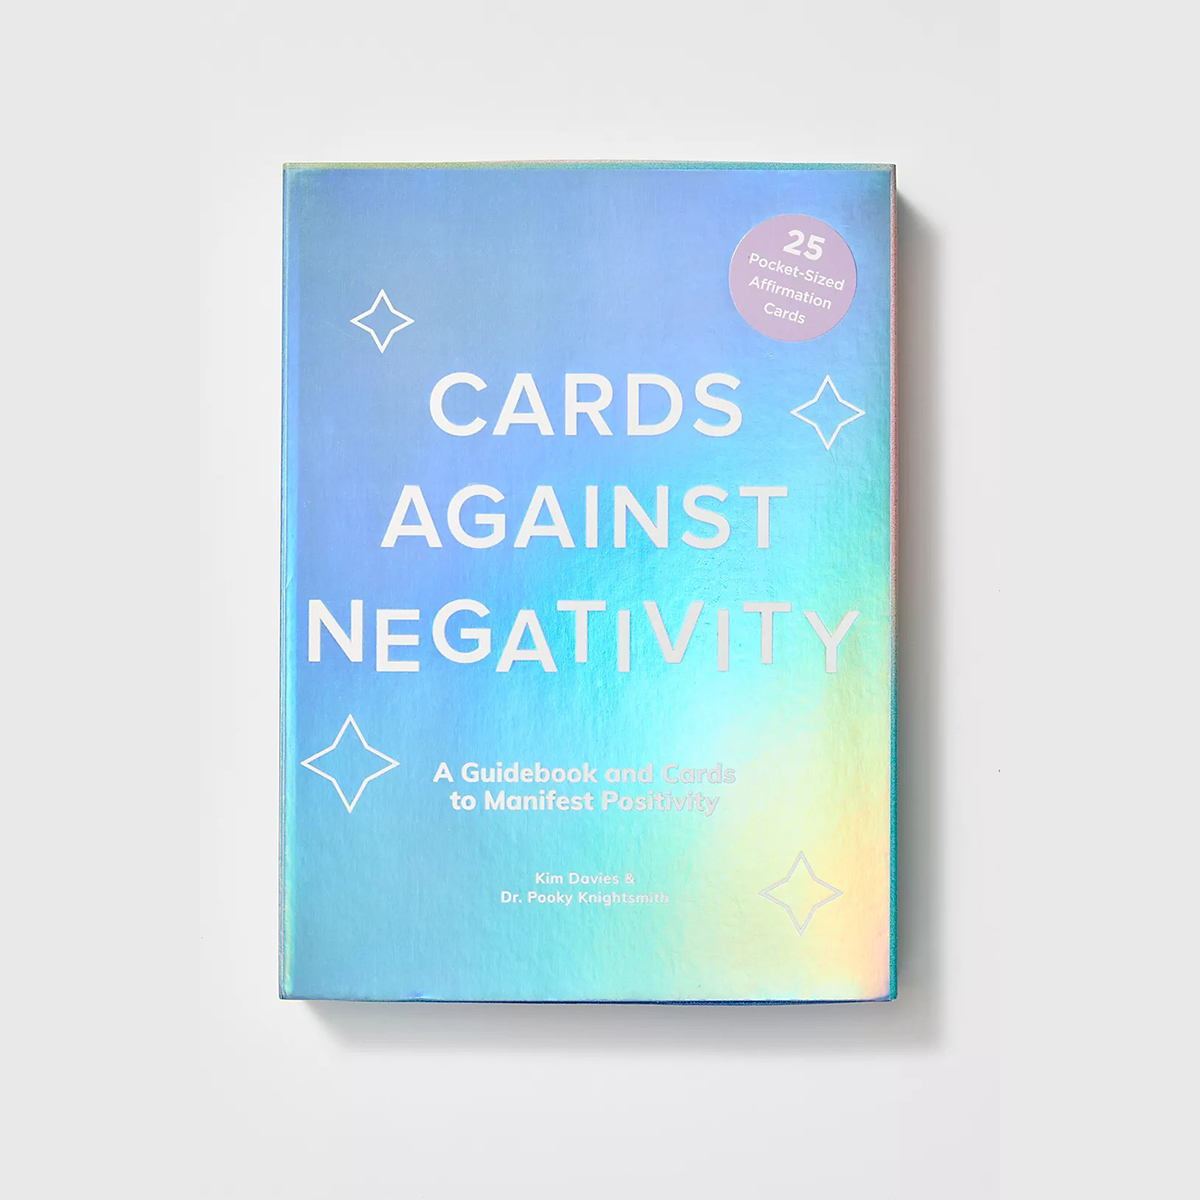 Abrams the Art of Books + Cards Against Negativity: A Guidebook and Cards to Manifest Positivity